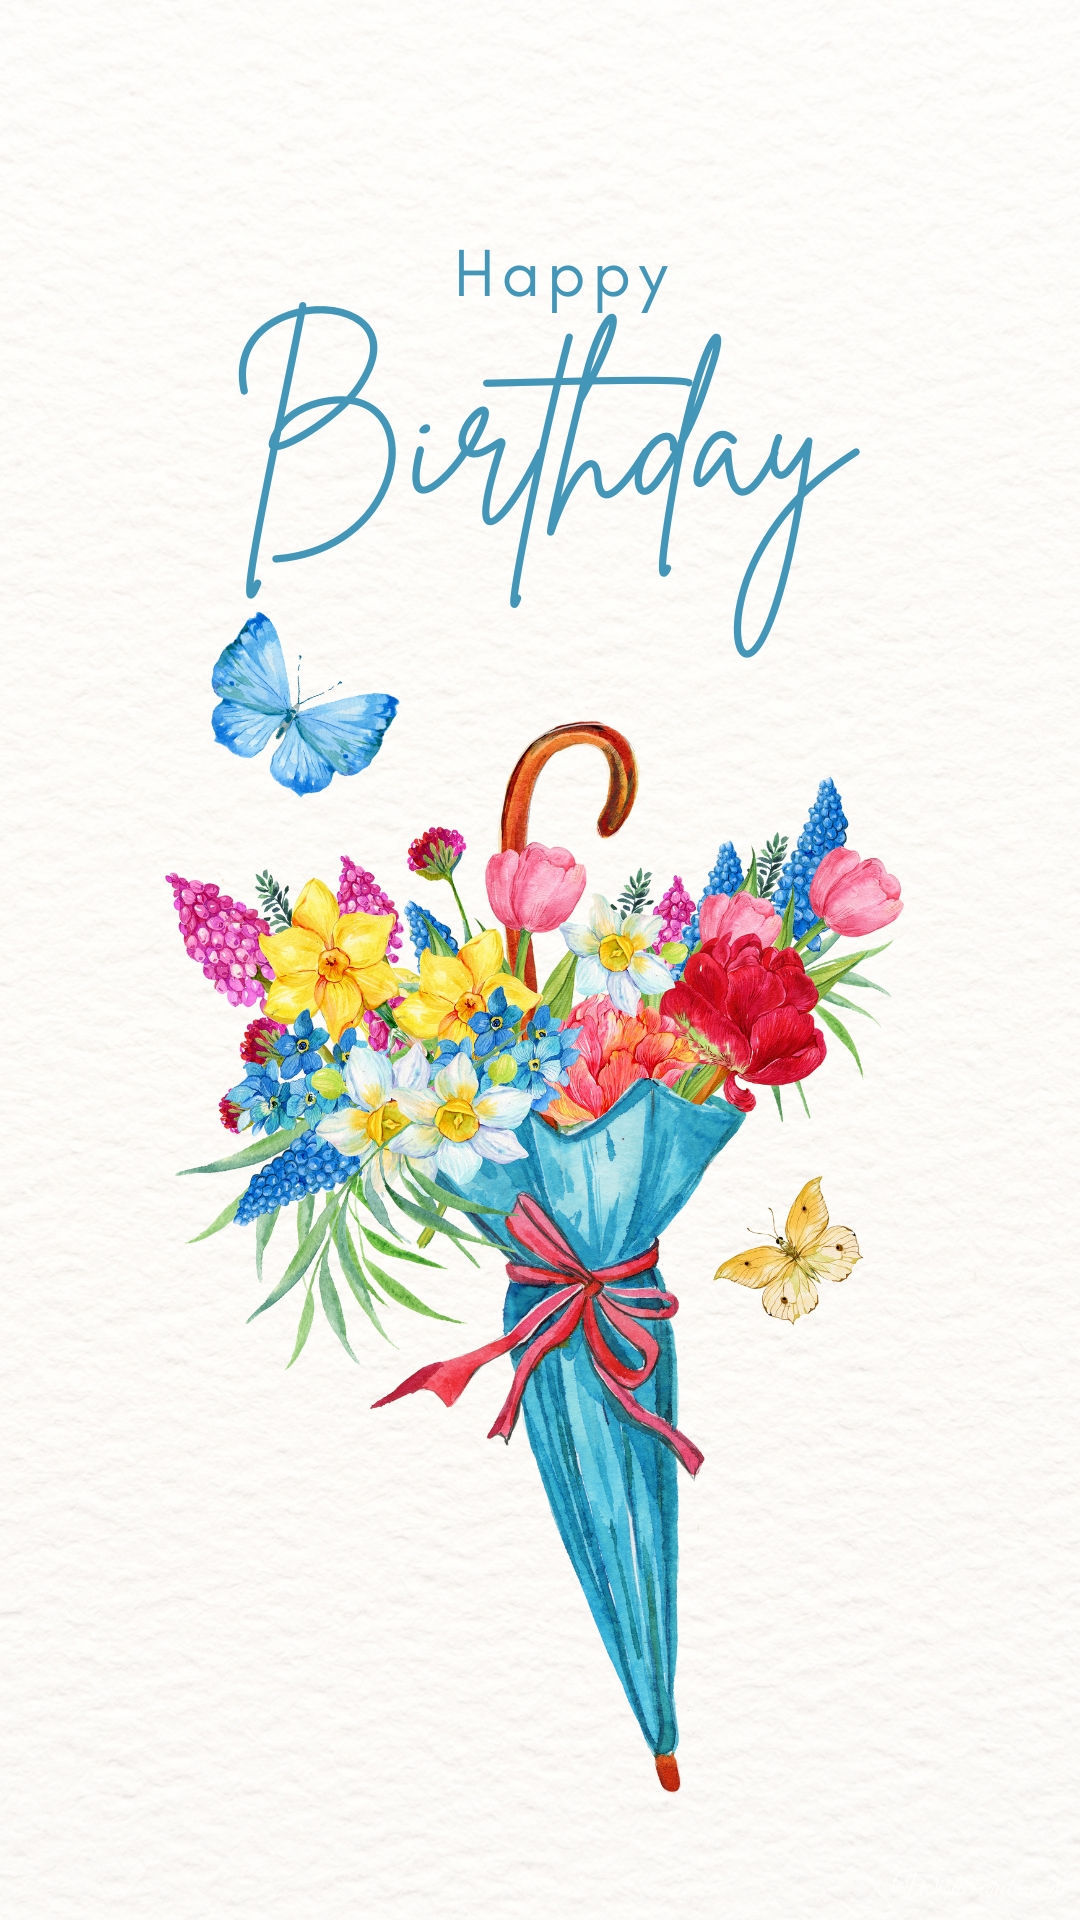 Happy Birthday Butterfly Image